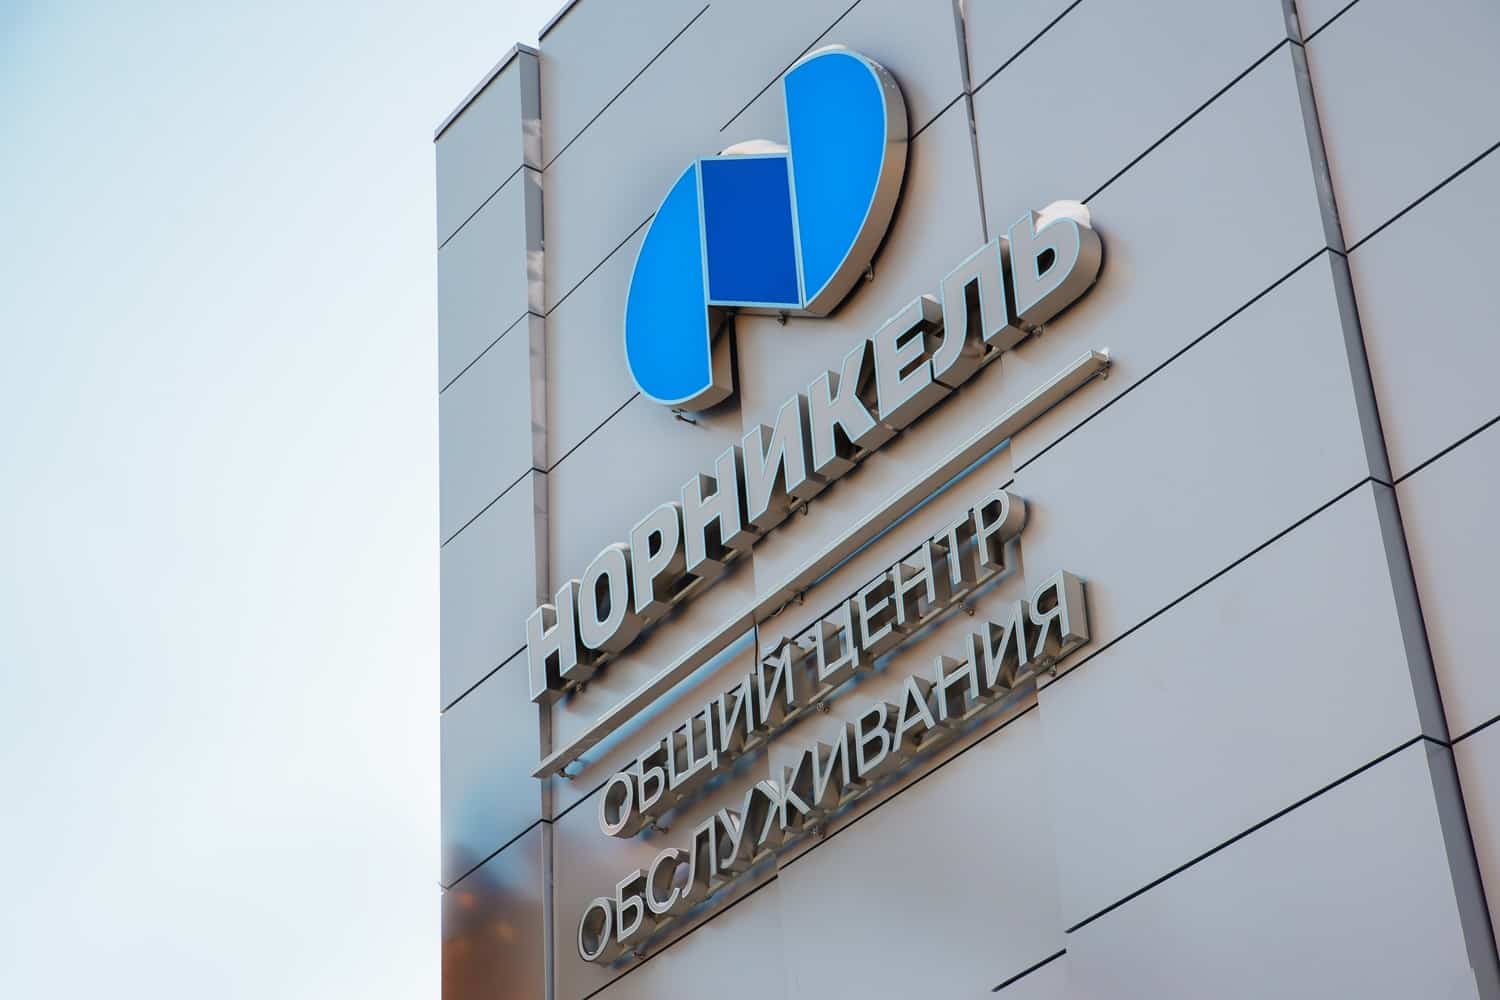 The logo of Nornickel (Nornickel Norilsk) on the side of a building in Norilsk, Russia.